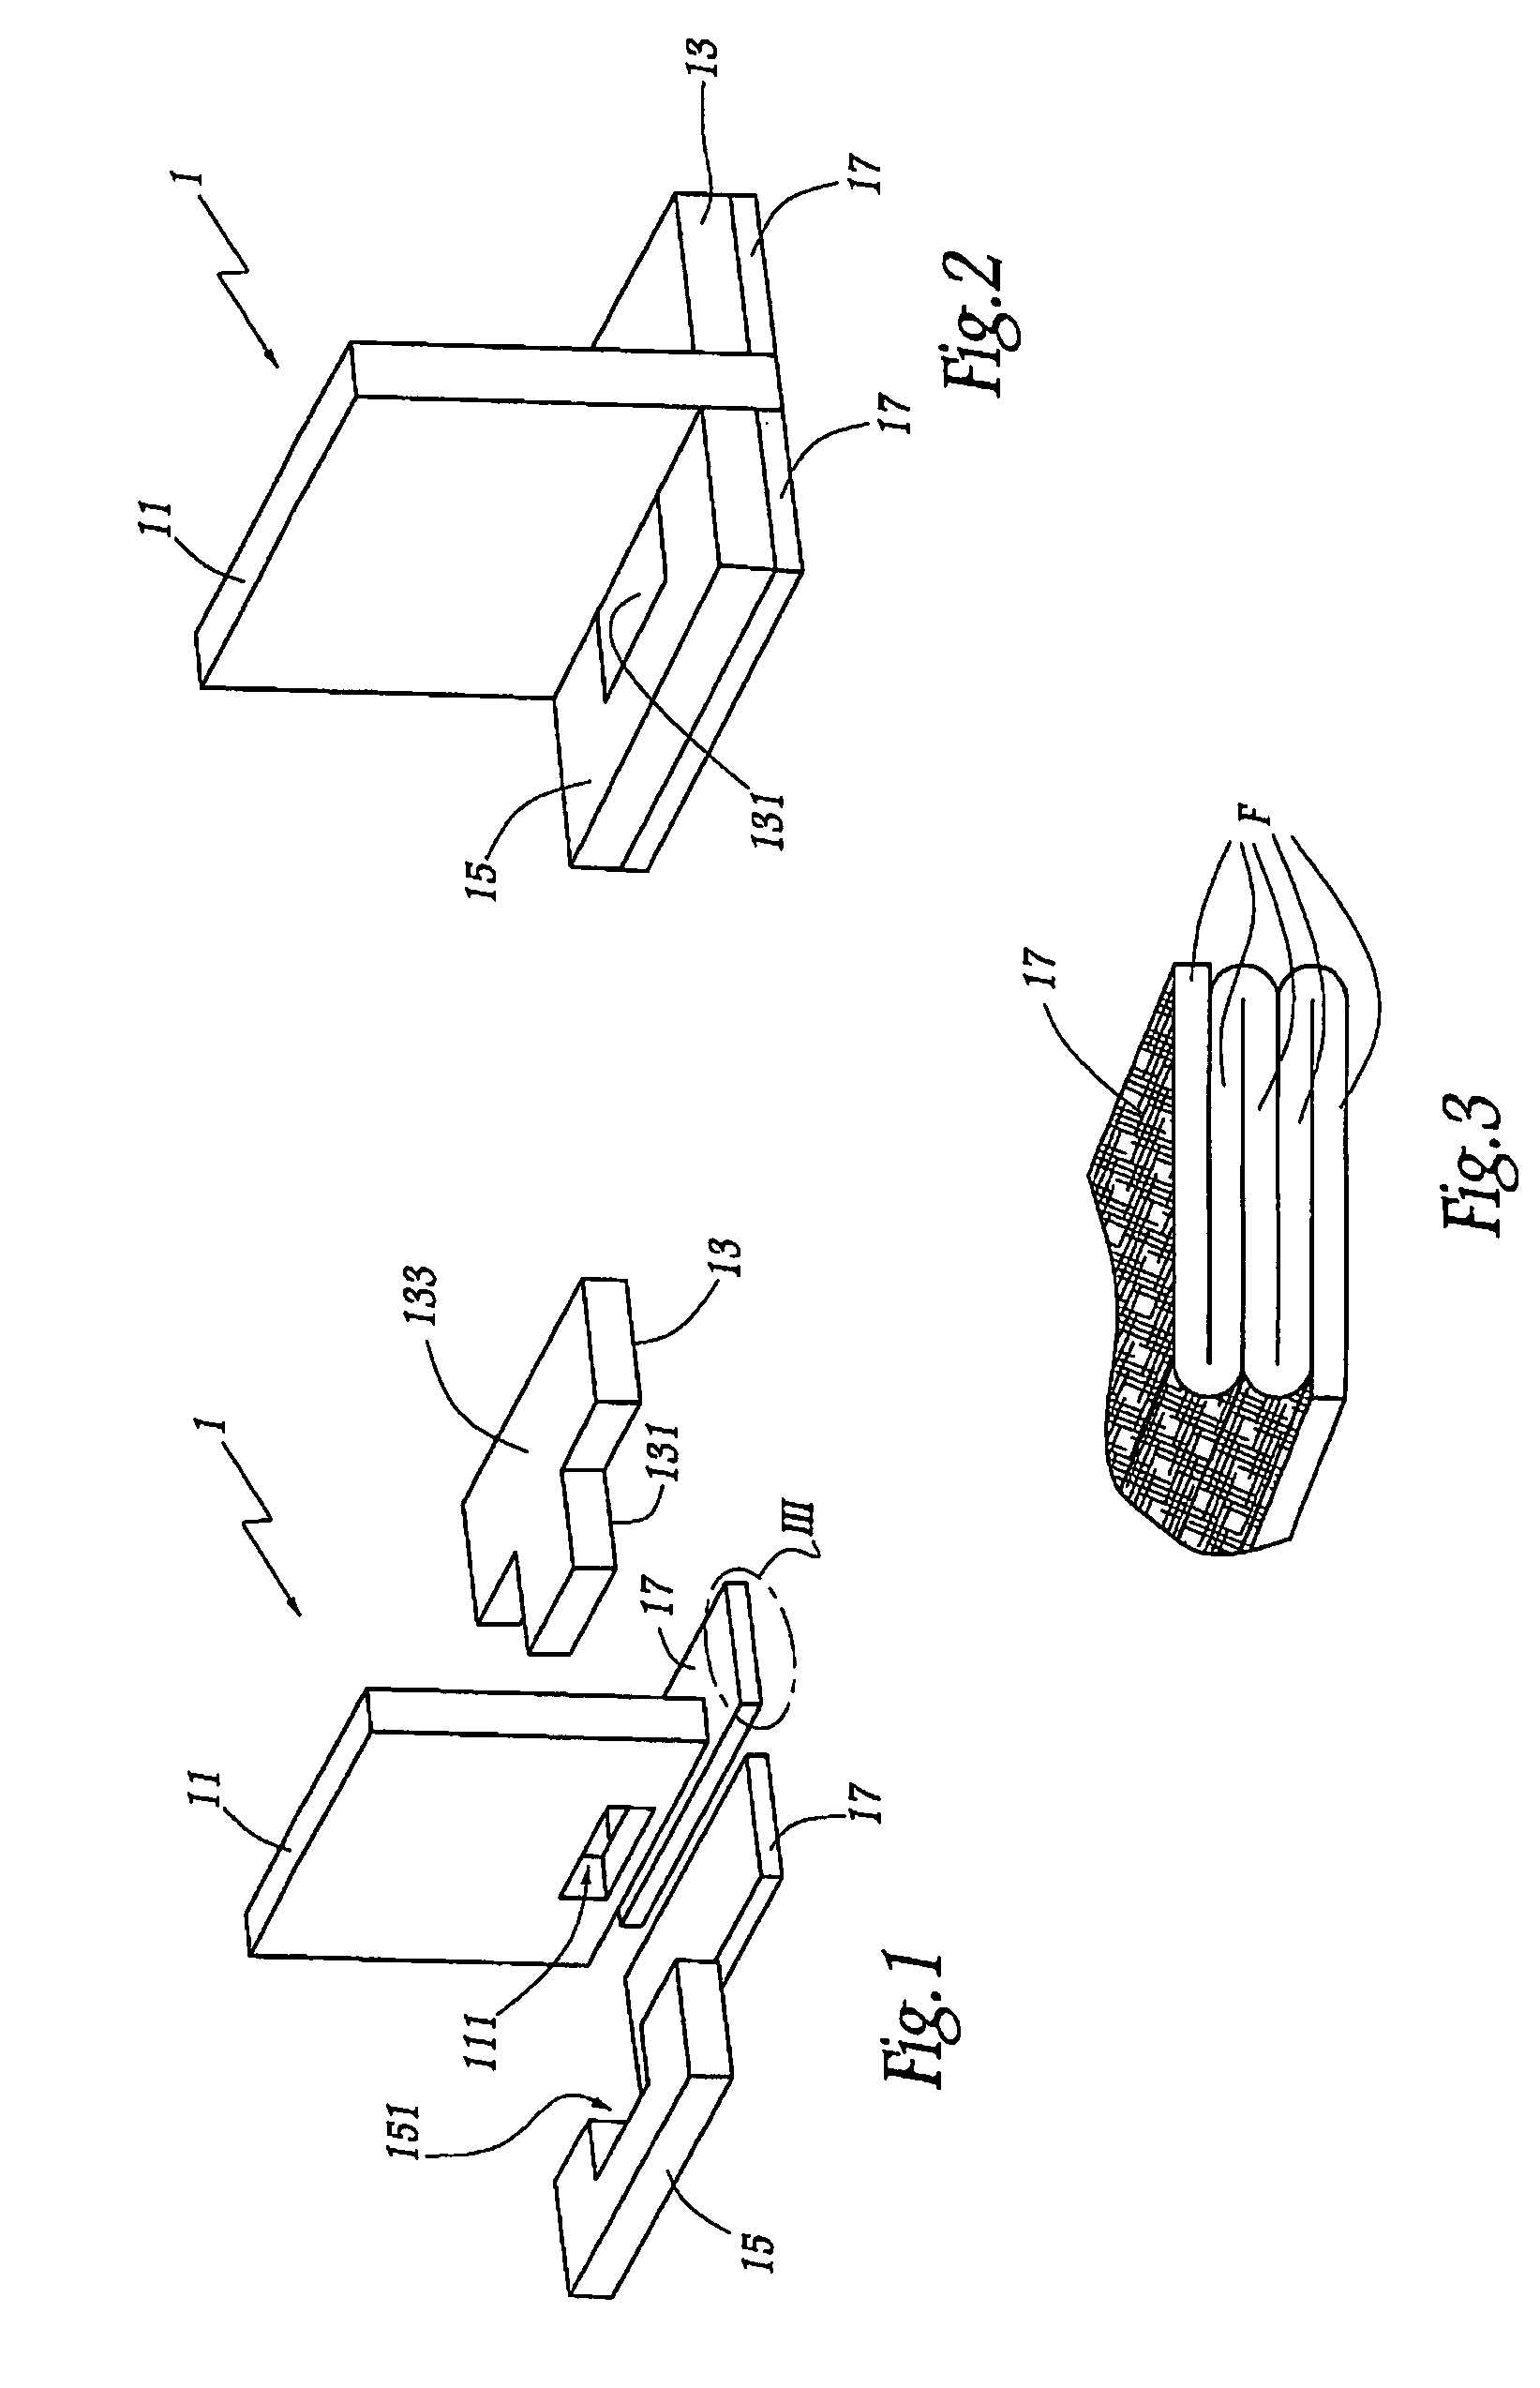 Composite structural part formed of multiple layer fibrous preforms inter-fitted with one another and reinforced with a polymer matrix coating